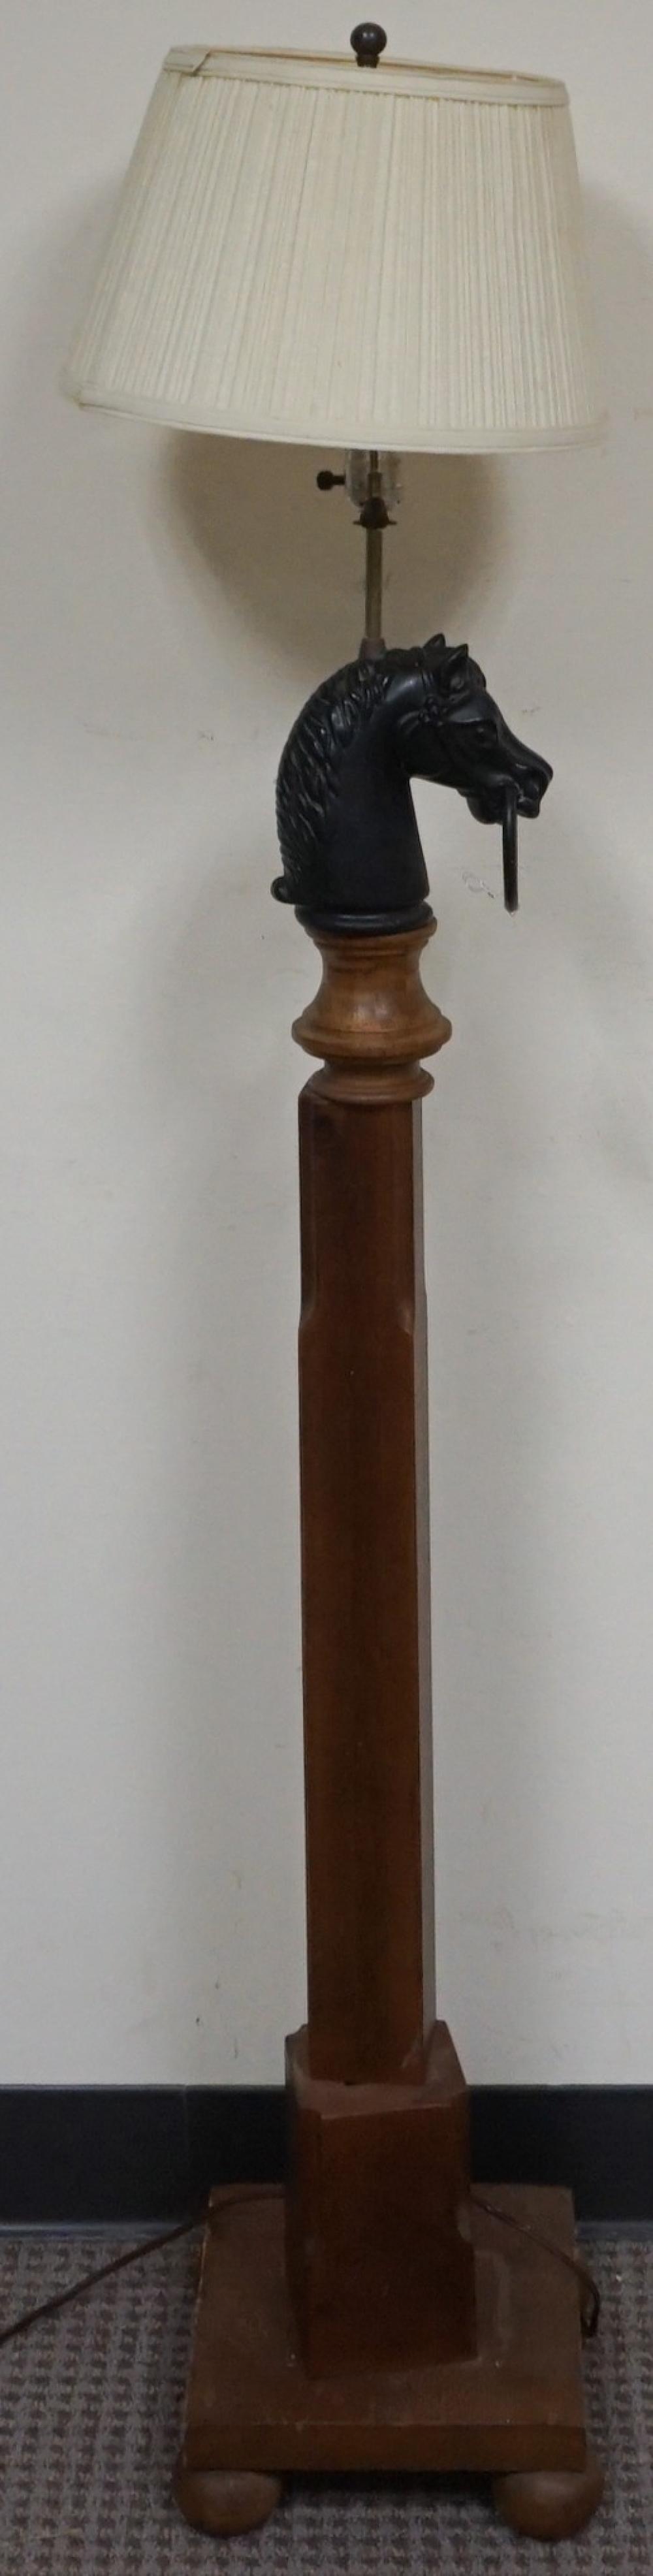 HITCHING POST-FORM FLOOR LAMP,